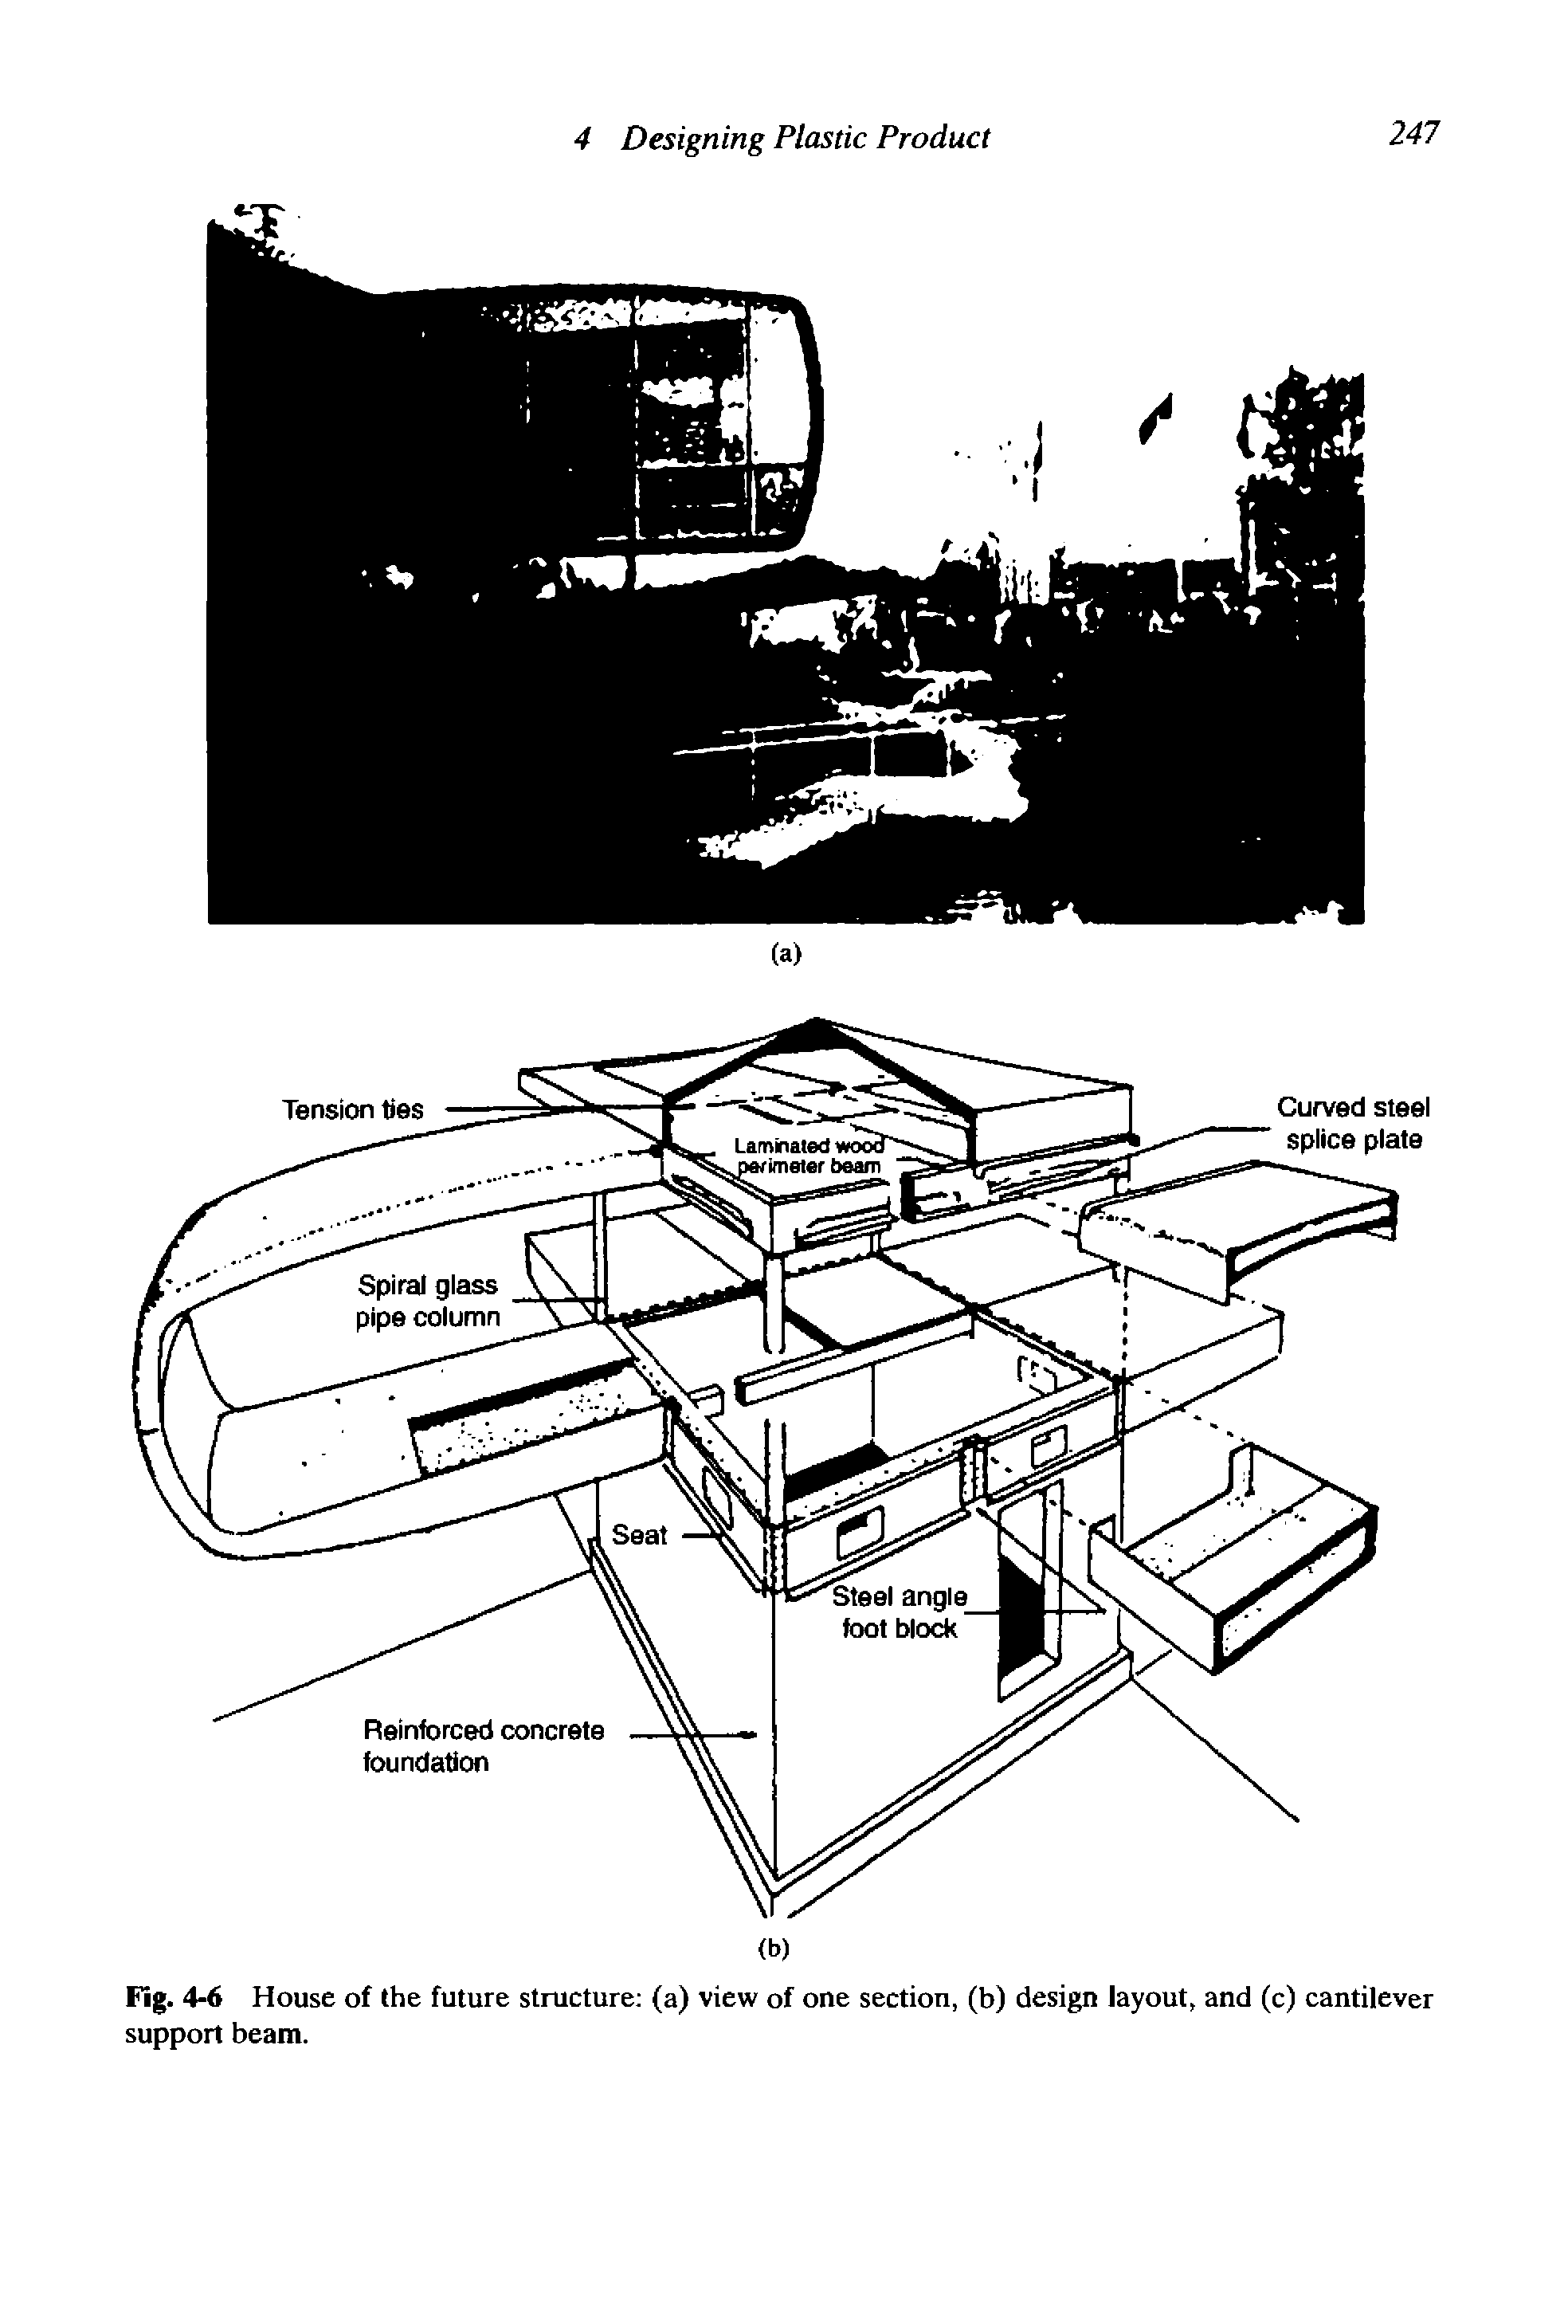 Fig. 4-6 House of the future structure (a) view of one section, (b) design layout, and (c) cantilever support beam.